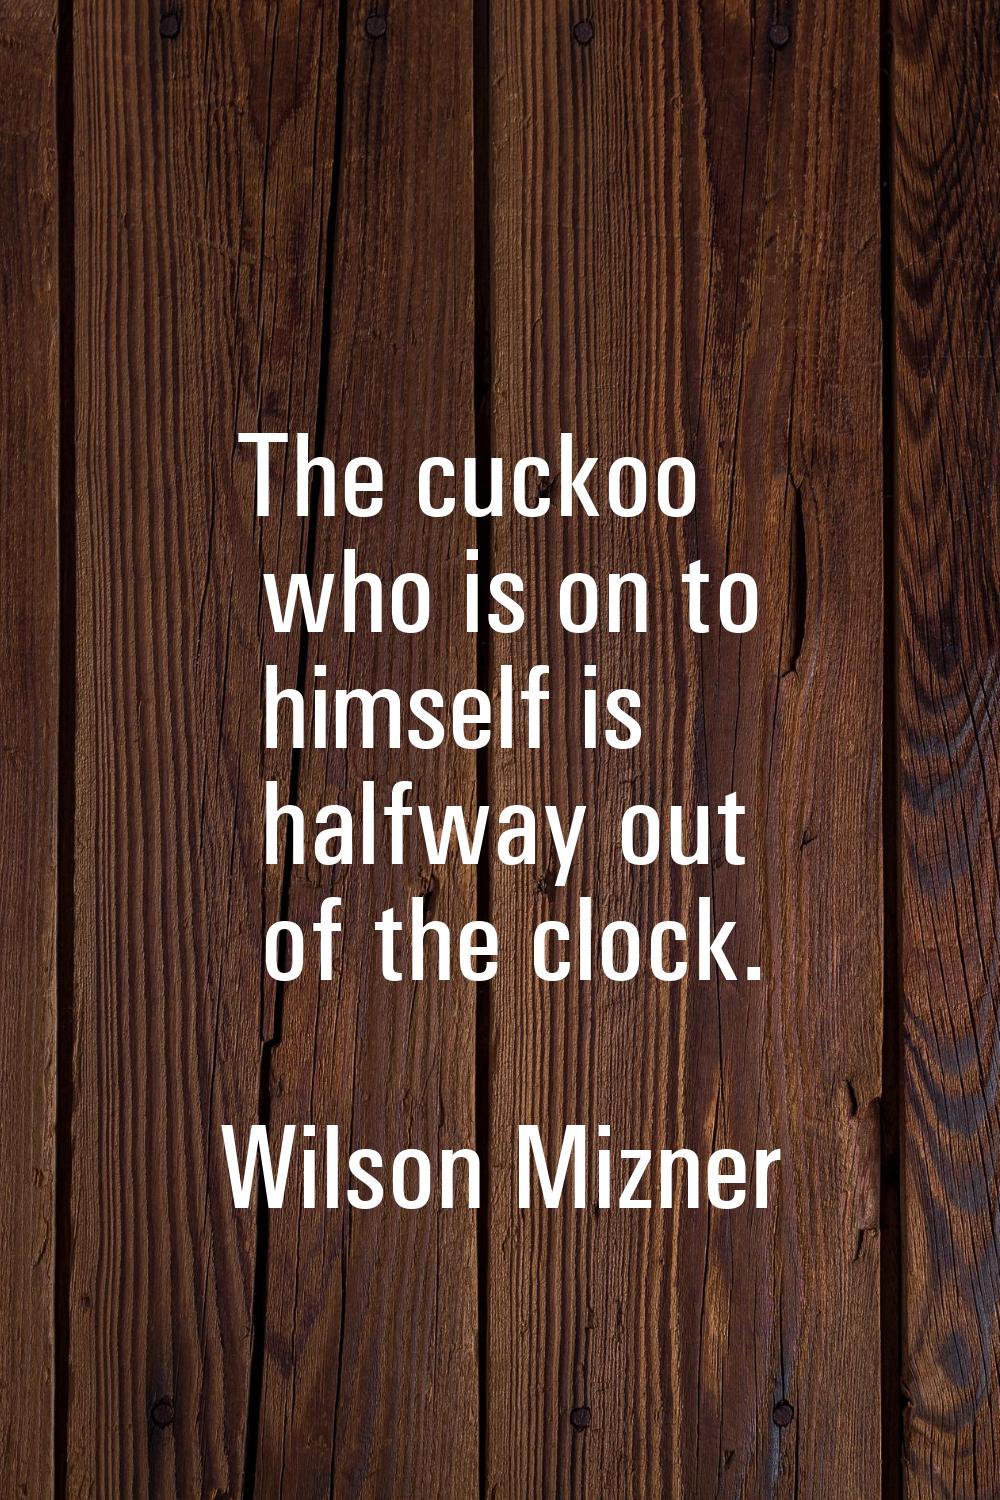 The cuckoo who is on to himself is halfway out of the clock.